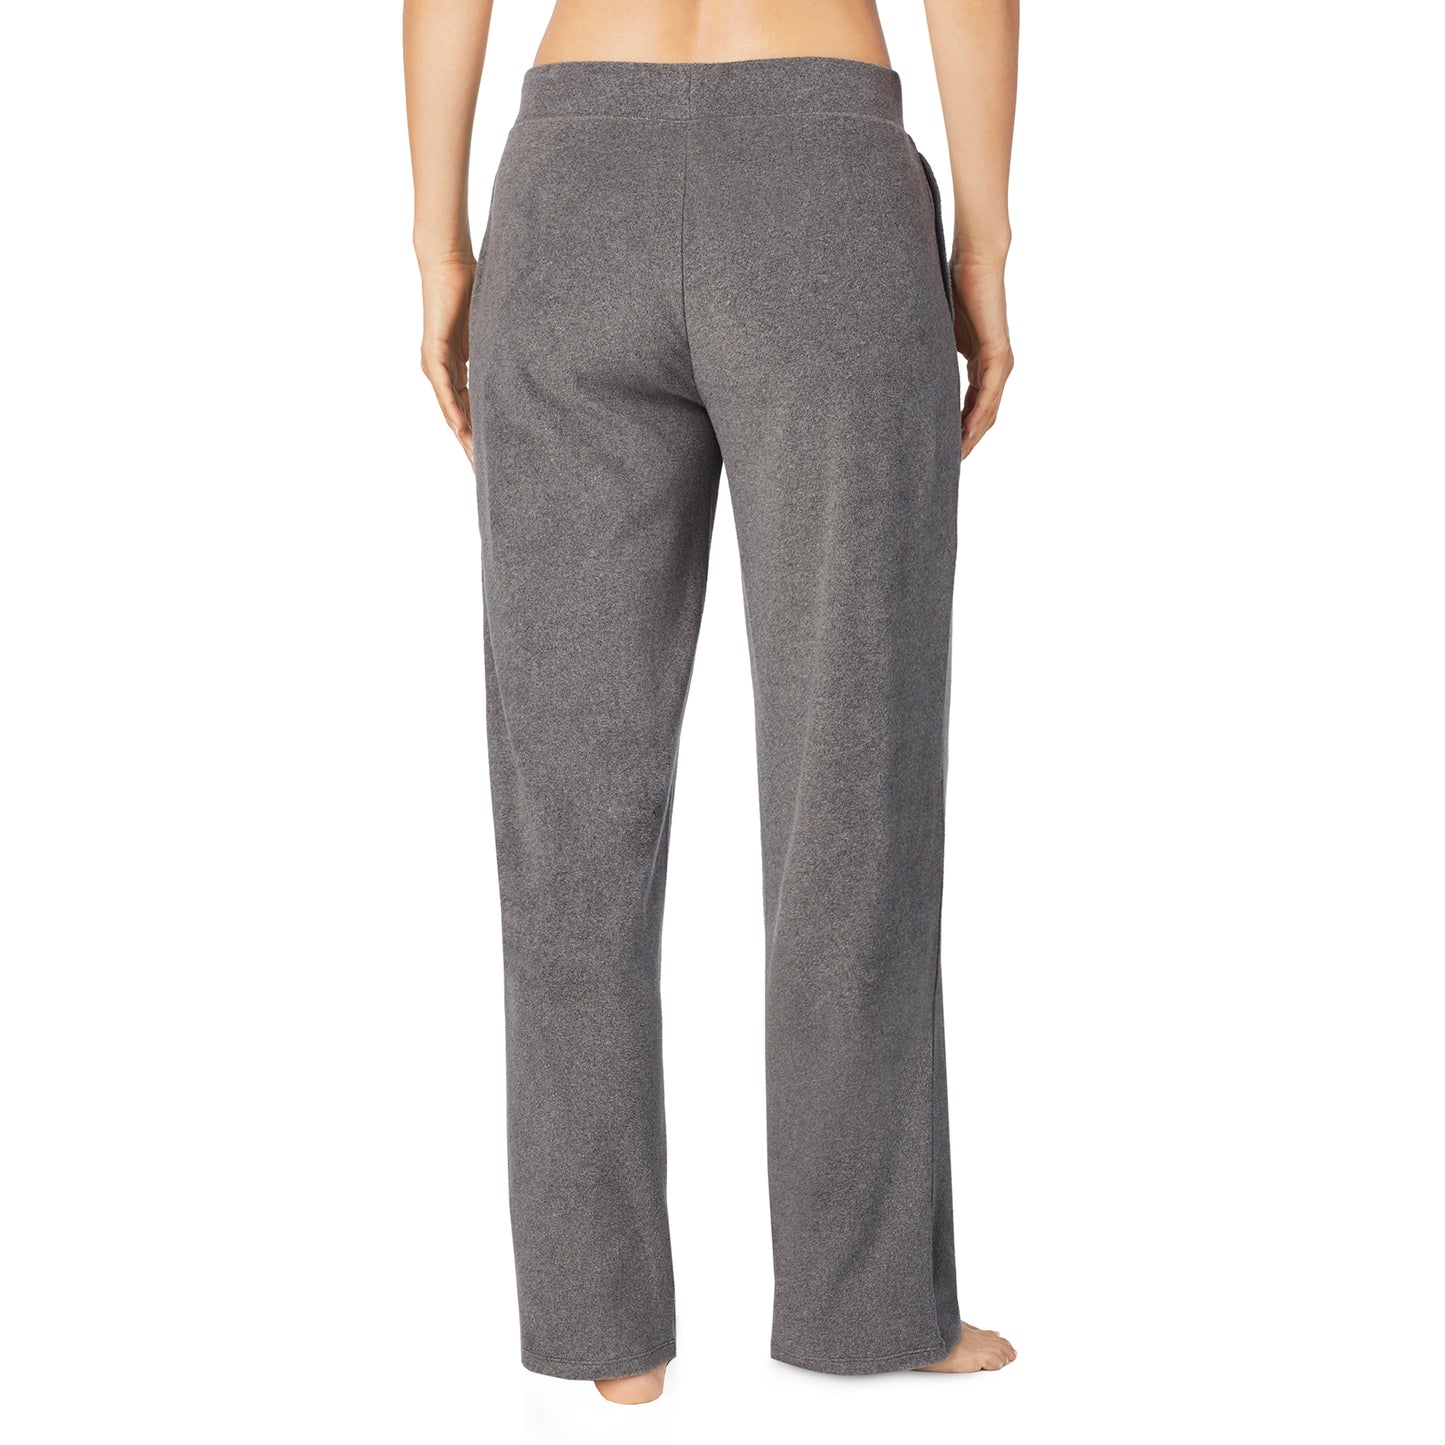 Charcoal Heather; Model is wearing size S. She is 5’9”, Bust 32”, Waist 25.5”, Hips 36”.@lower body of a lady wearing grey lounge pant